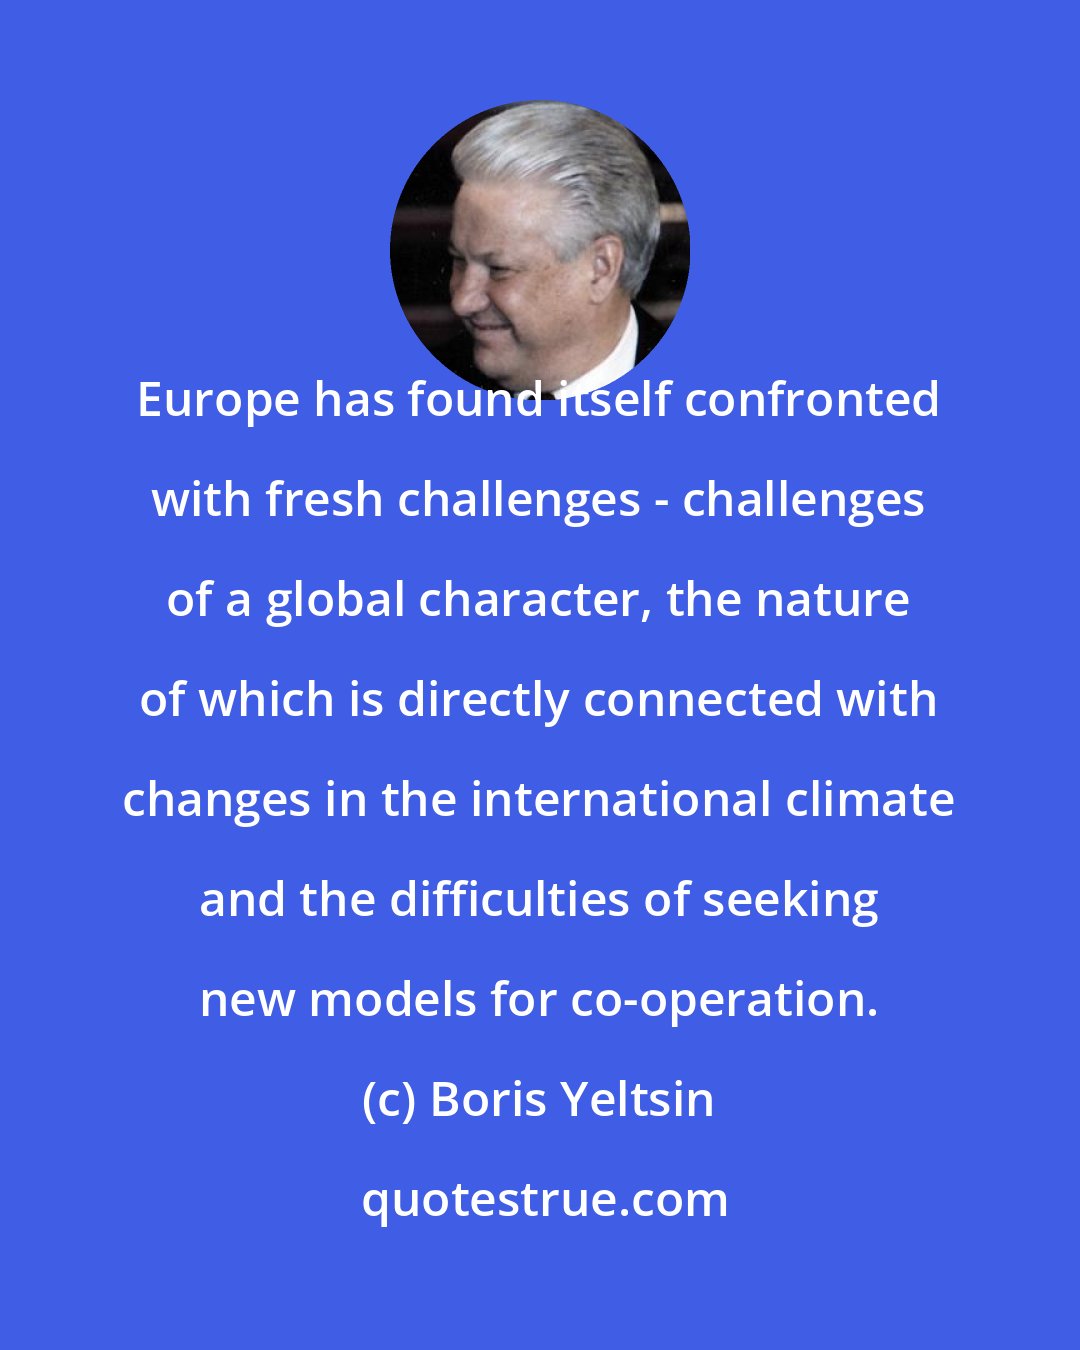 Boris Yeltsin: Europe has found itself confronted with fresh challenges - challenges of a global character, the nature of which is directly connected with changes in the international climate and the difficulties of seeking new models for co-operation.